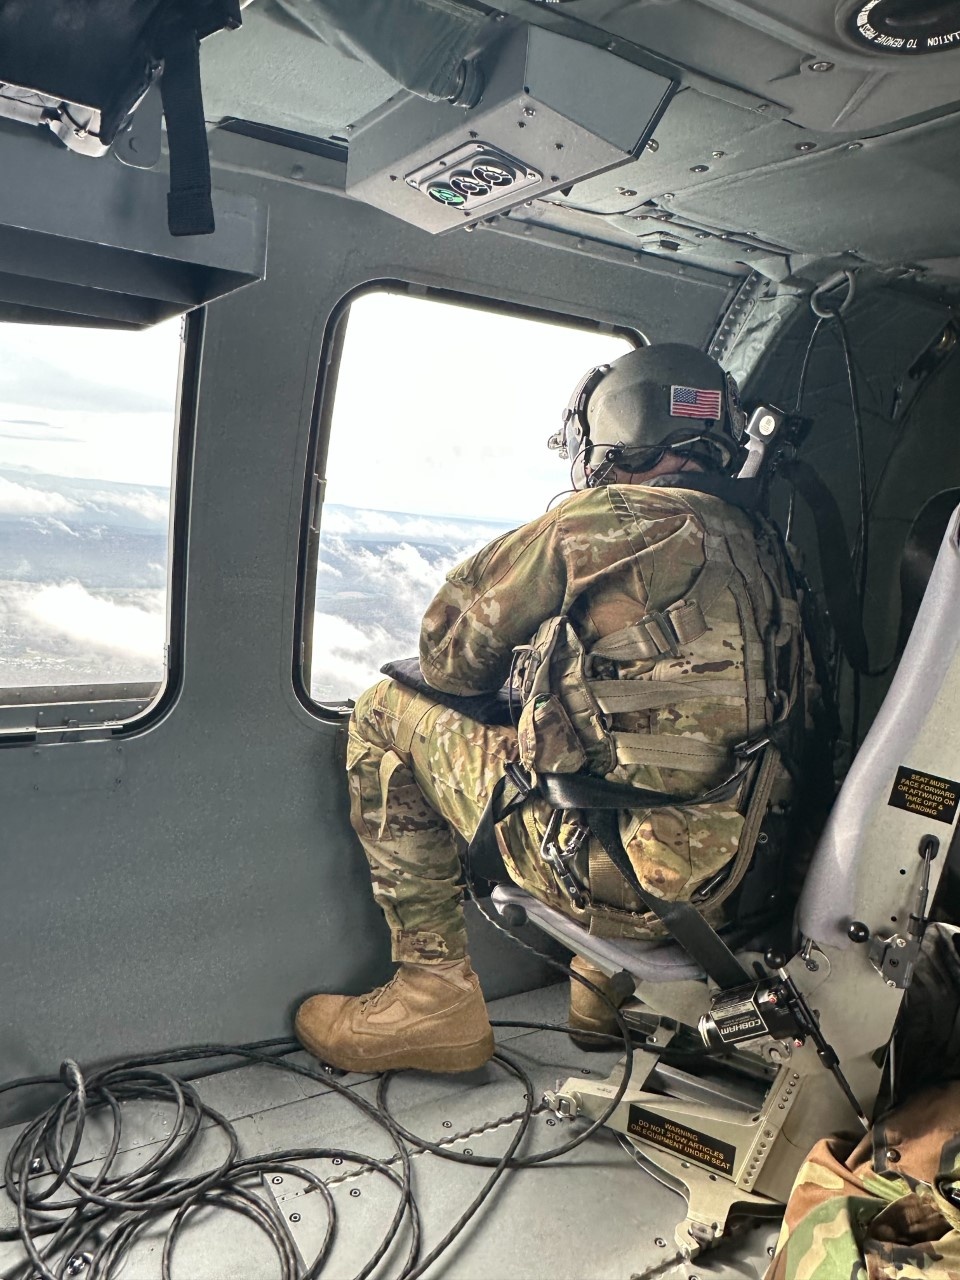 28th Expeditionary Combat Aviation Brigade, 28th Infantry Division trains local first responders